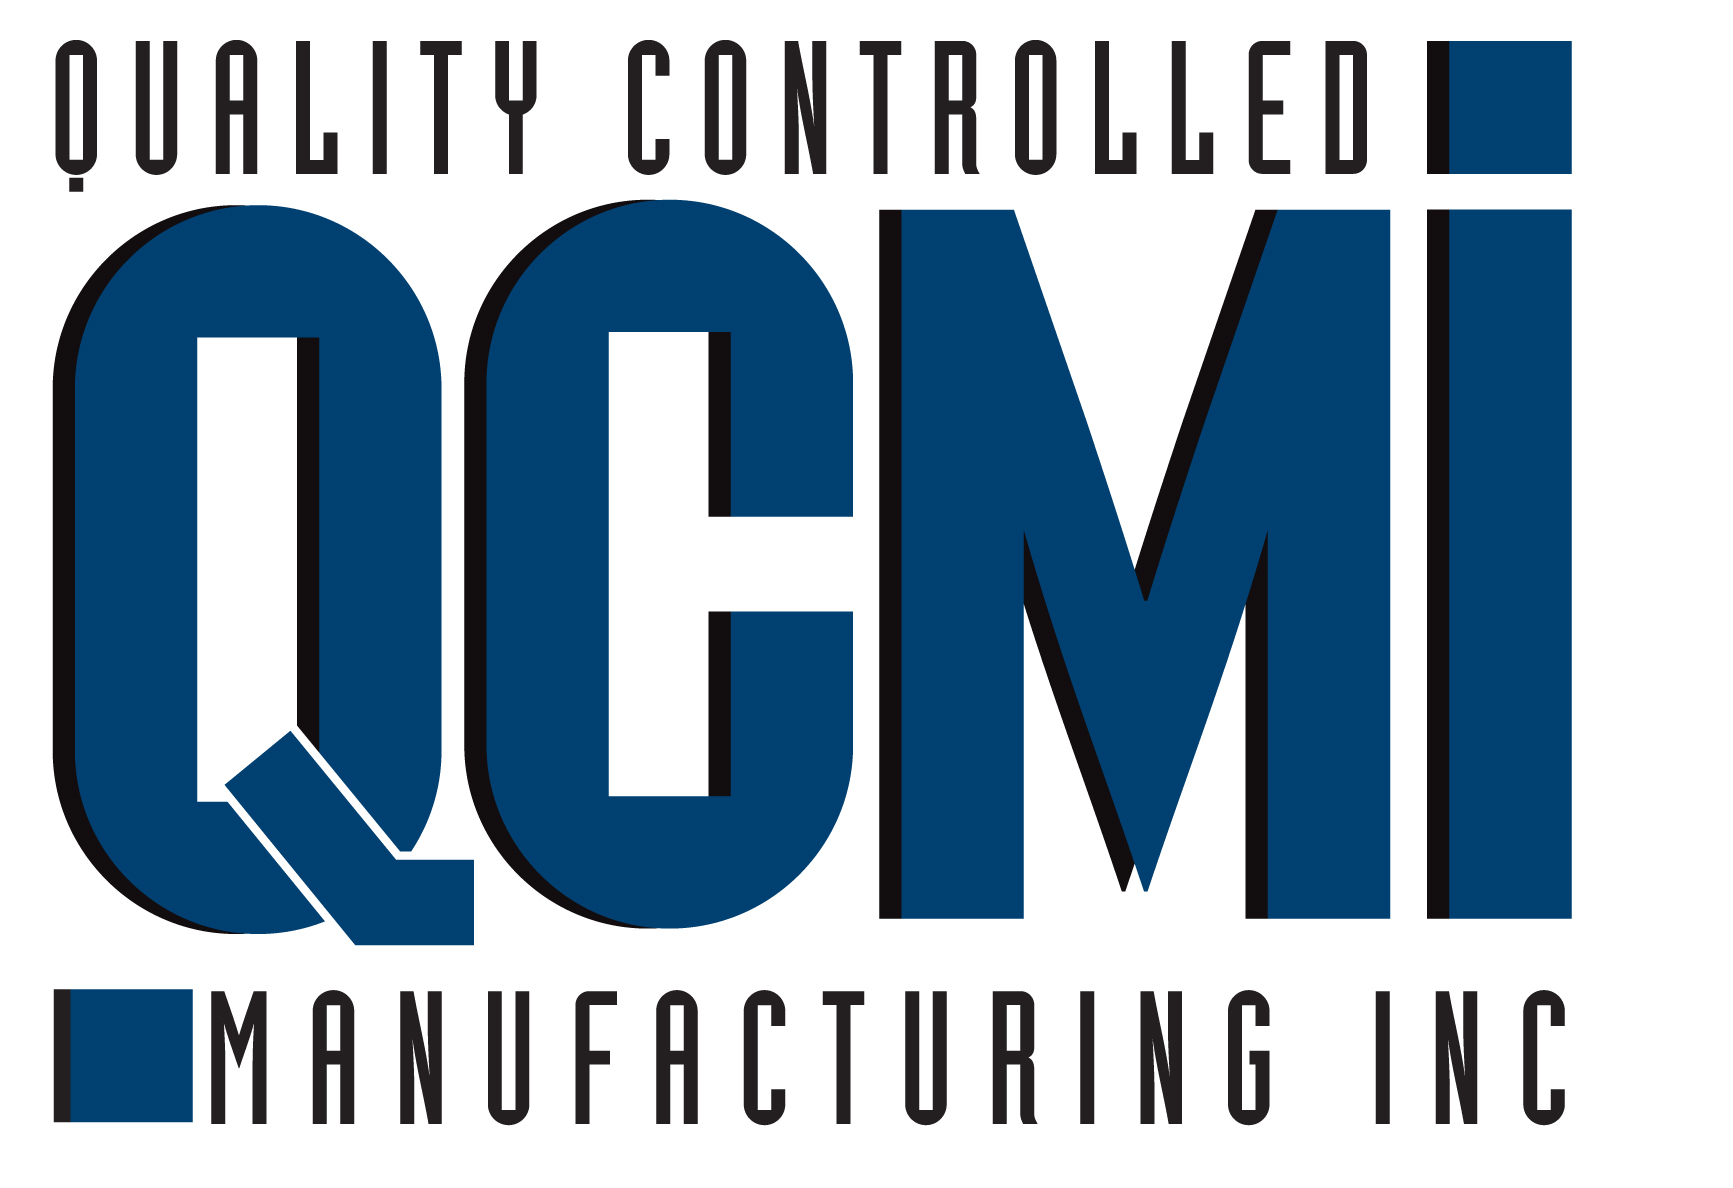 Quality Controlled Manufacturing Inc.